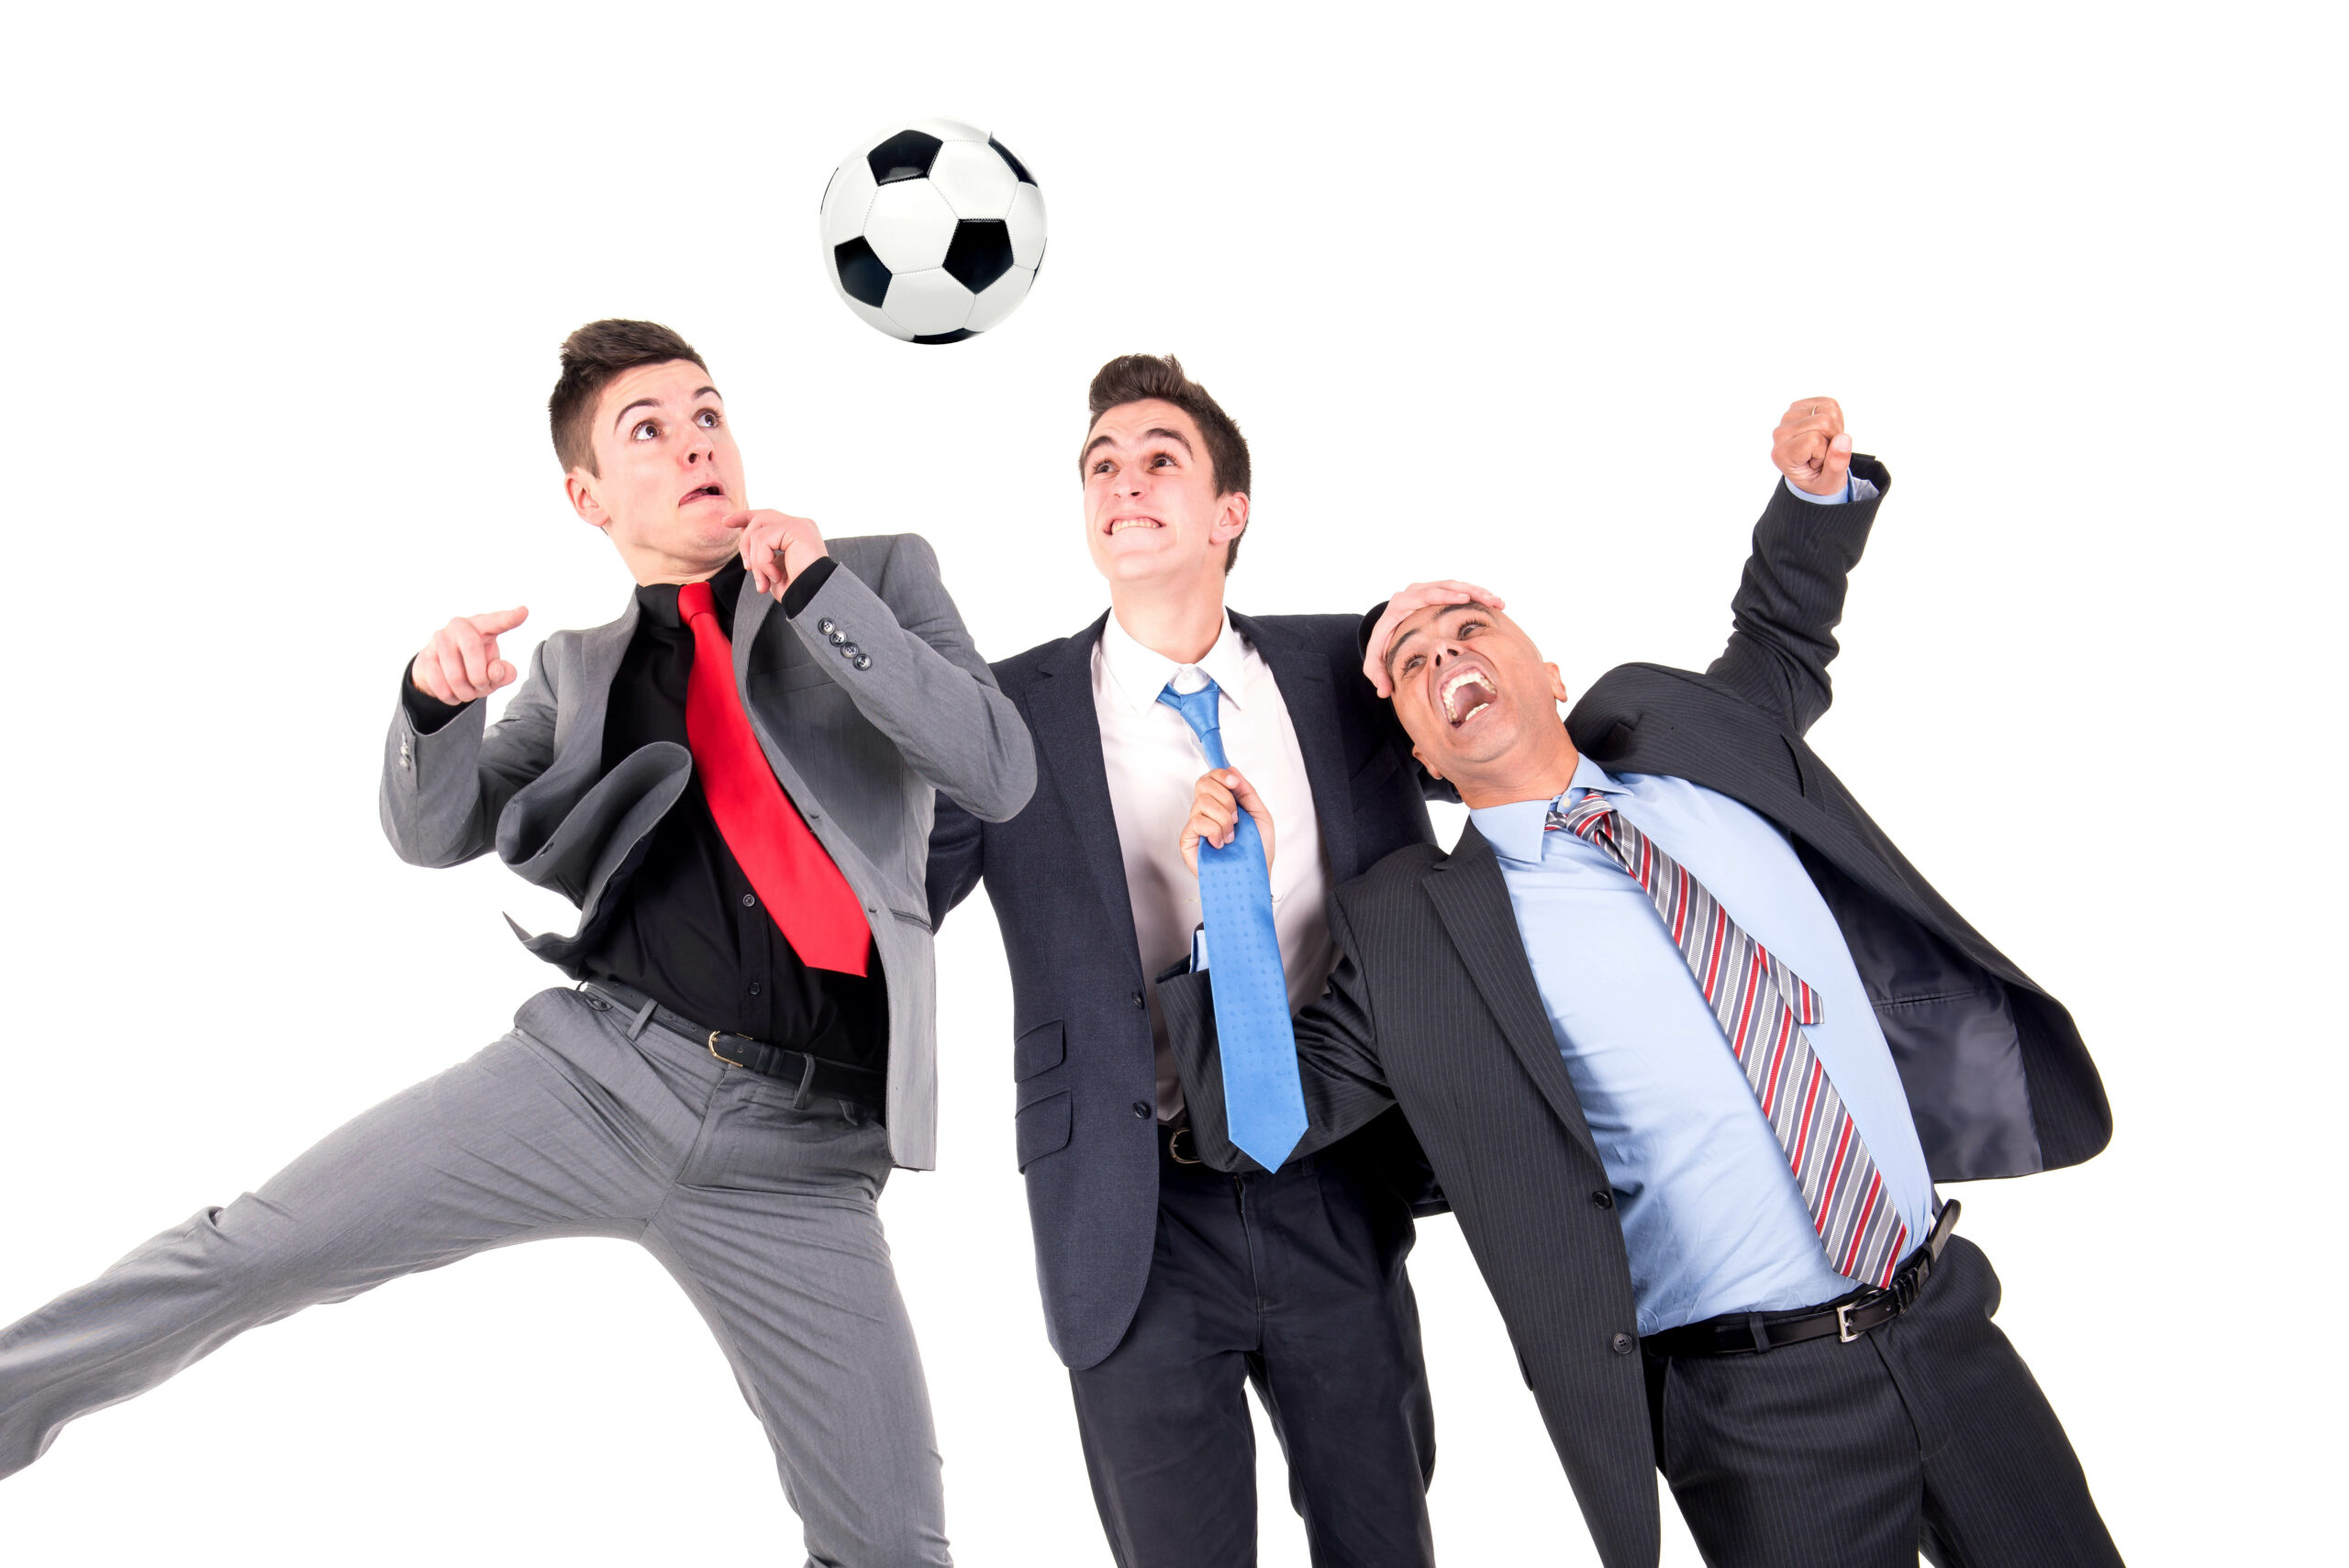 Absenteeism can be beaten by taking a relaxed approach to watching the football